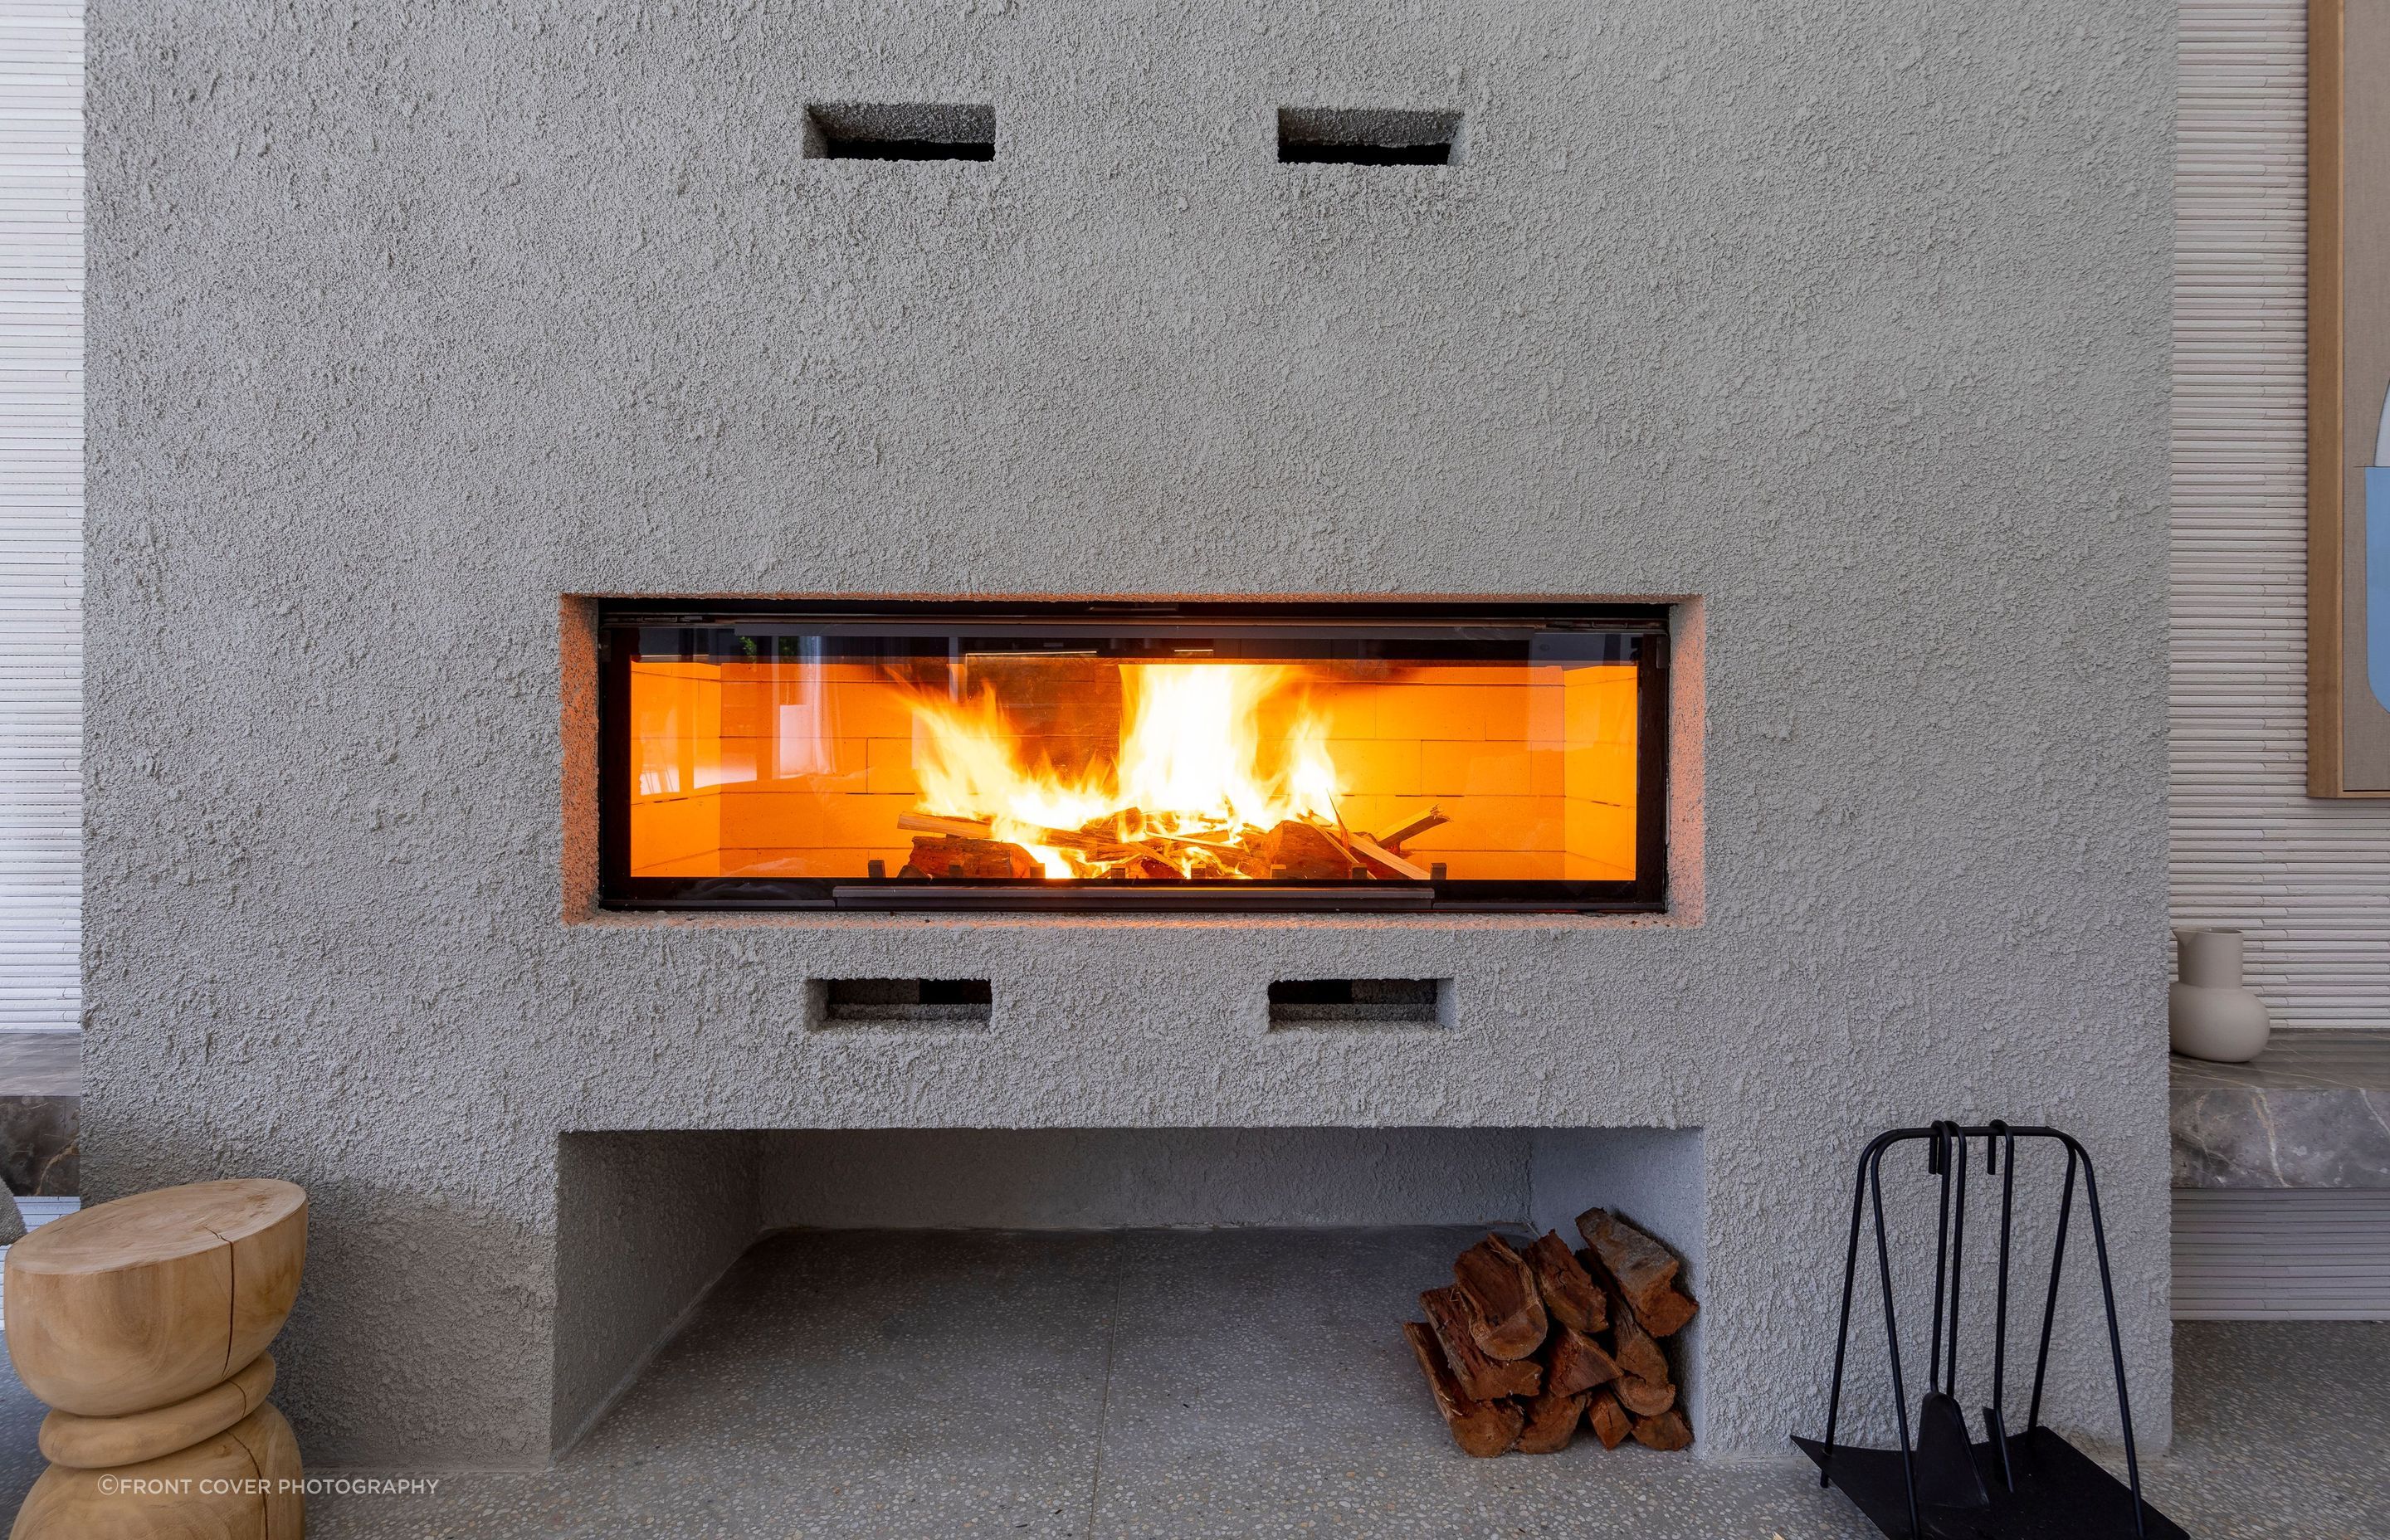 Up close and personal with the beautiful French wood fireplace